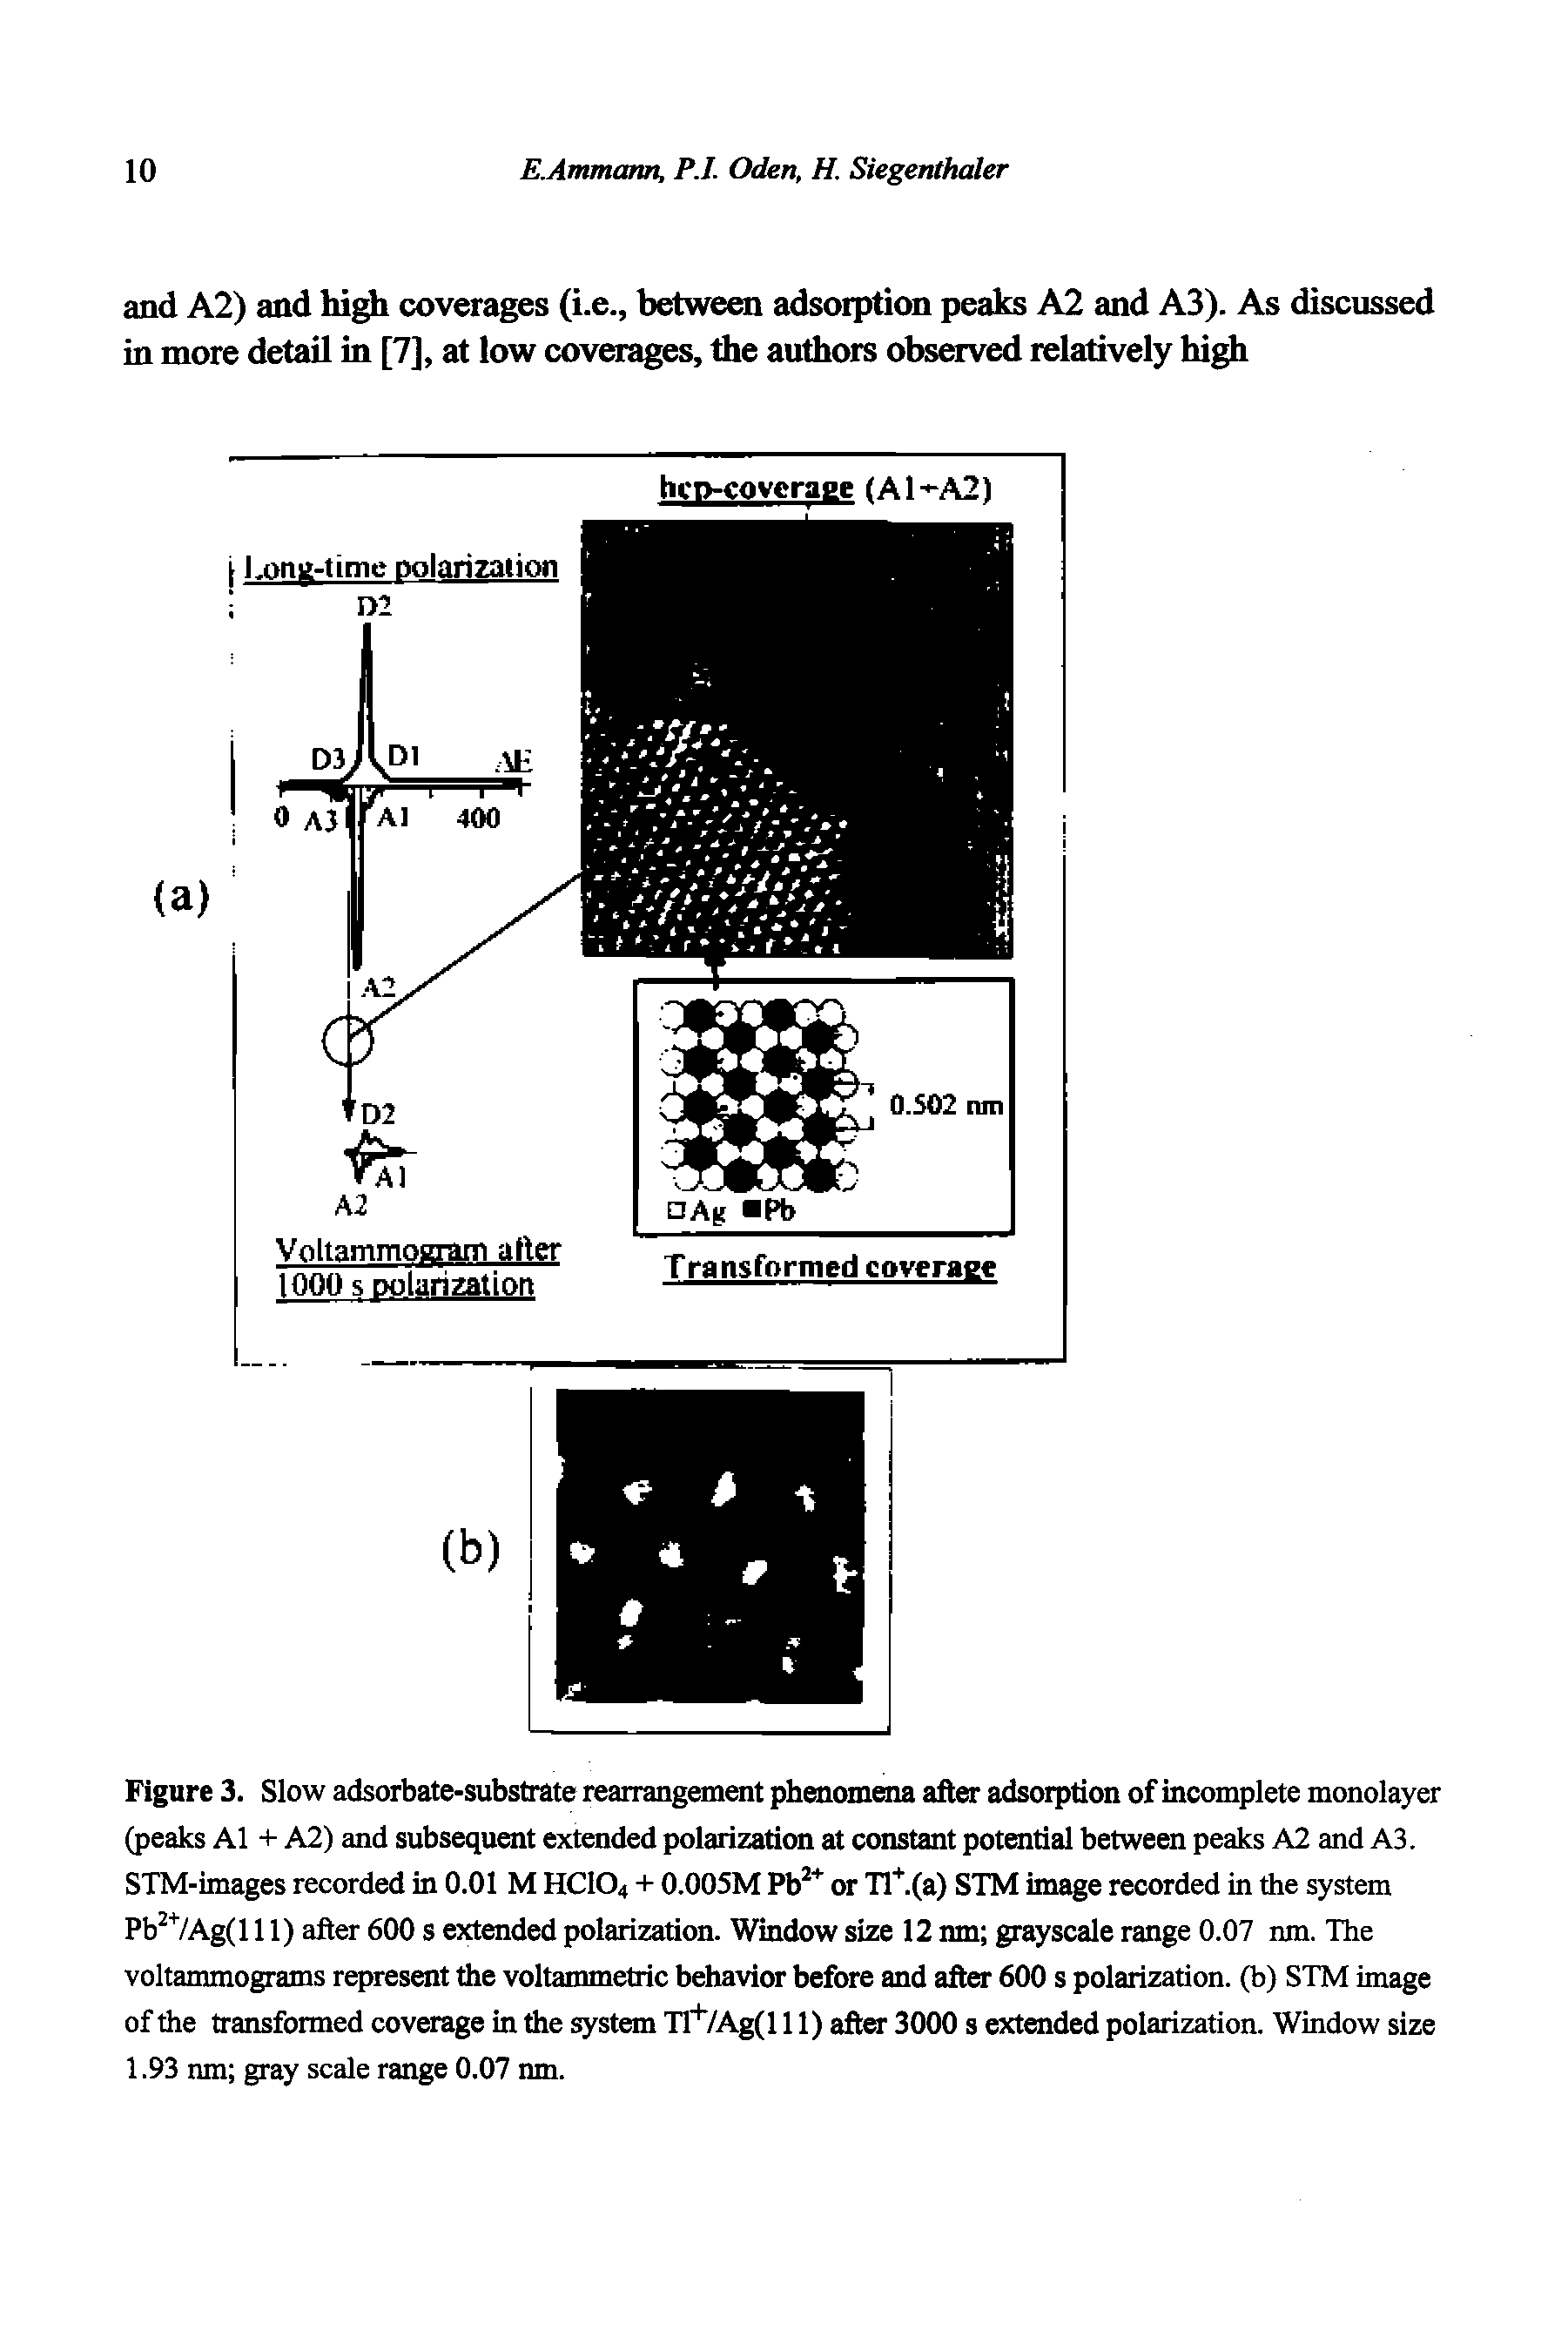 Figure 3. Slow adsorbate-substrate rearrangement phenomena after adsorption of incomplete monolayer (peaks A1 + A2) and subsequent extended polarization at constant potential between peaks A2 and A3. STM-images recorded in 0.01 M HCIO4 + 0.005M Pb or Tl. (a) STM image recorded in the system Pb 7Ag(l 11) after 600 s extended polarization. Window size 12 nm grayscale range 0.07 nm. The voltammograms represent the voltammetric behavior before and after 600 s polarization, (b) STM image of the transformed coverage in the system n" /Ag(l 11) after 3000 s extended polarization. Window size...